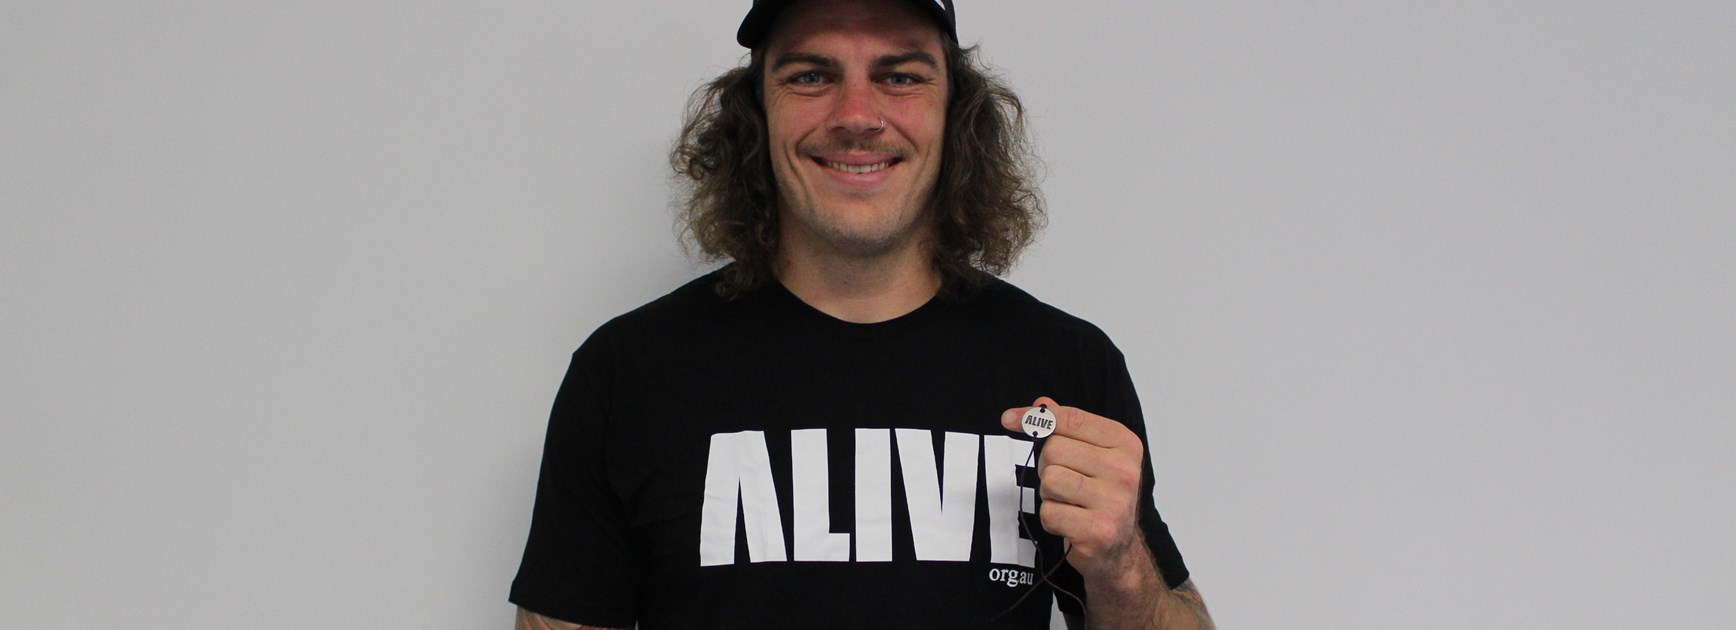 Ethan Lowe supports ALIVE.